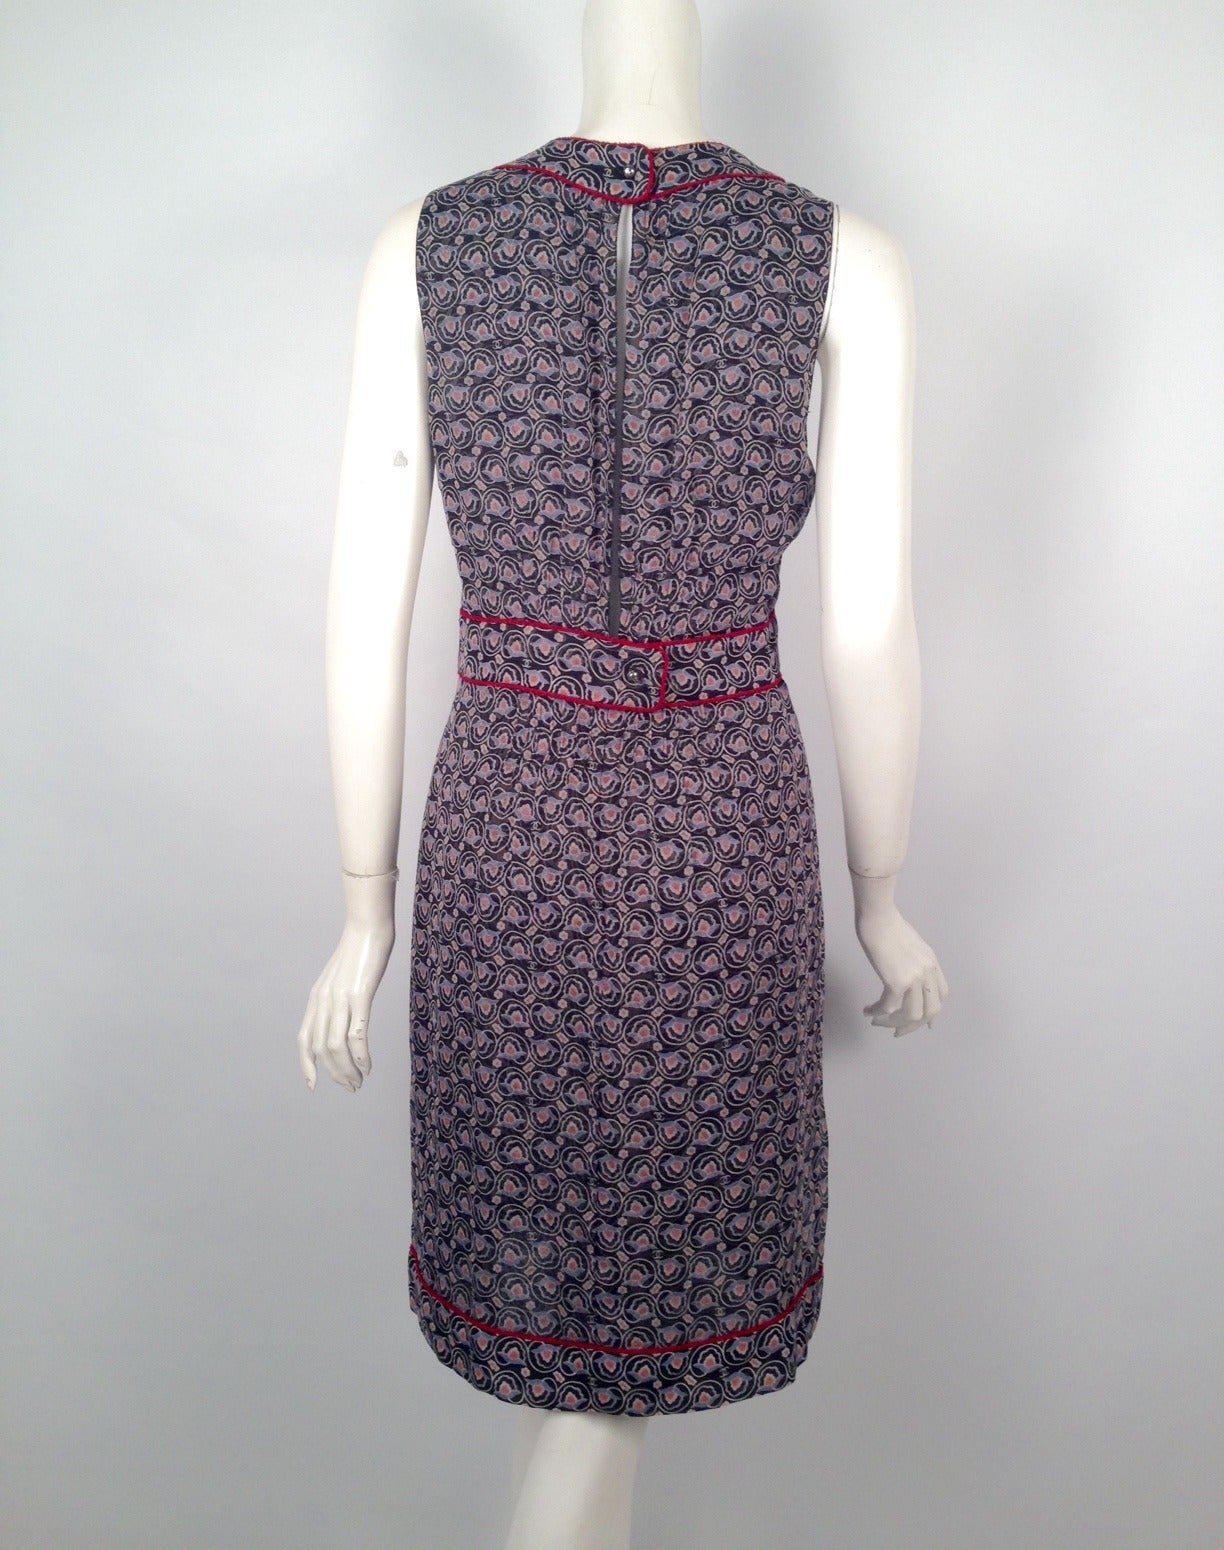 Spring 2004 Chanel Navy Silk Floral Print Sleeveless Dress In Excellent Condition For Sale In Palm Beach, FL